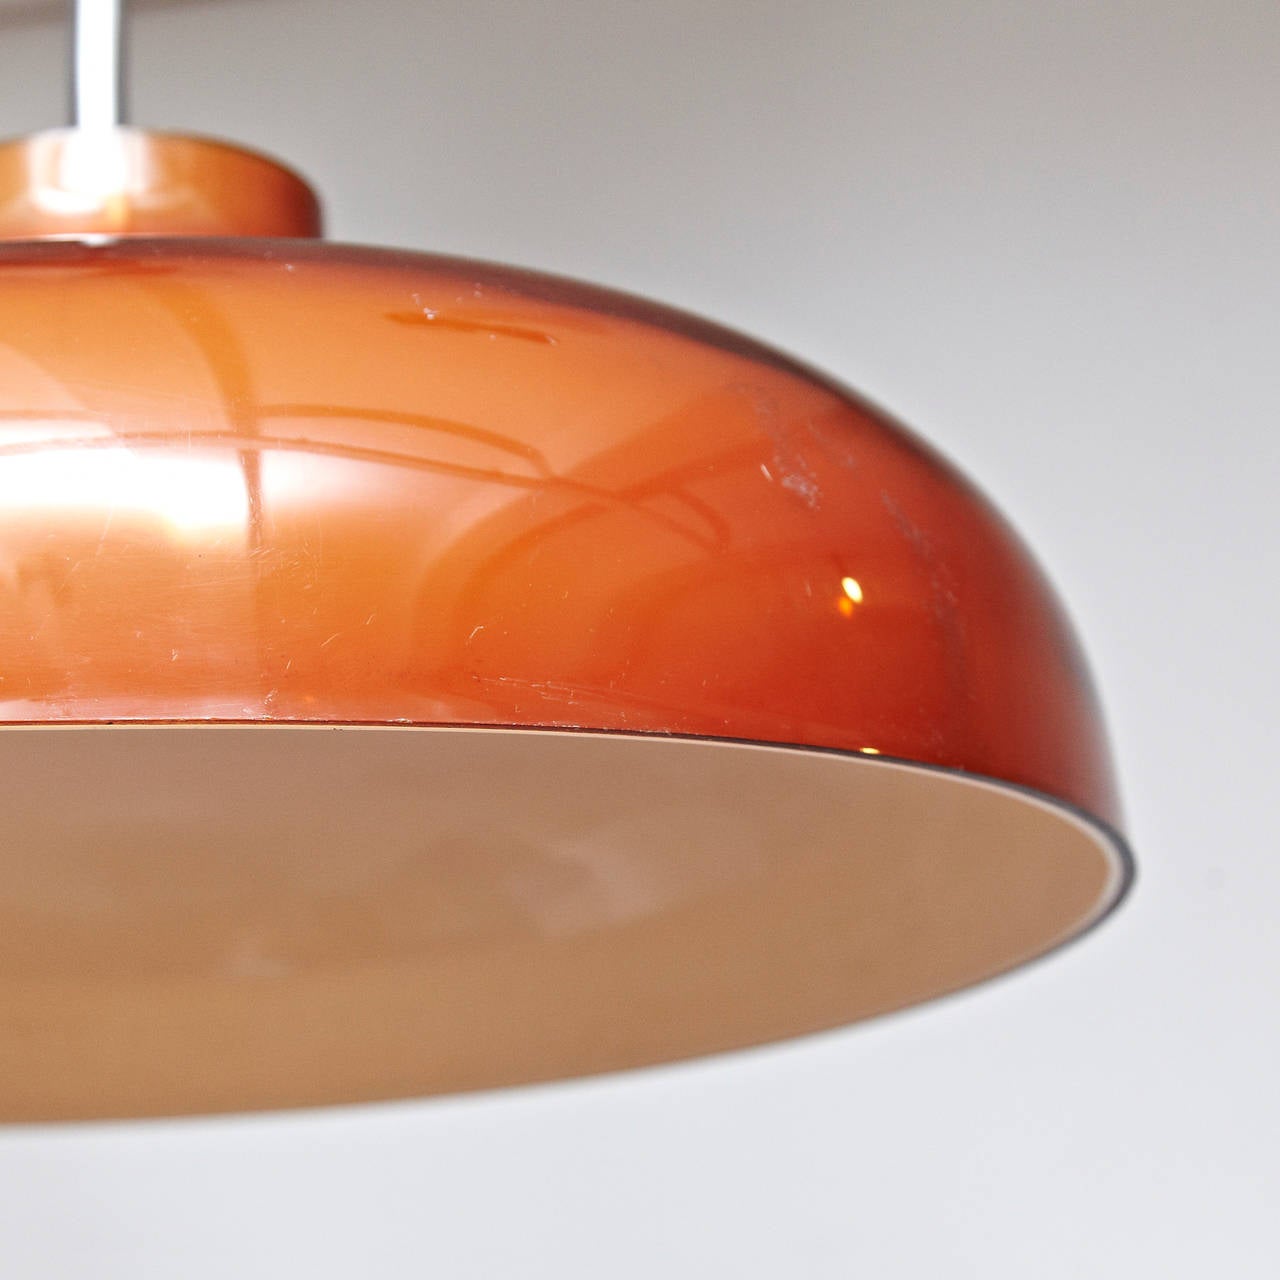 Lamp designed by Miguel Mila´, circa 1950.
Manufactured by Tramo (Spain).

In good original condition, with minor wear consistent with age and use.

Miguel Mila´ represents like no other person Spanish contemporary design. He belongs to the